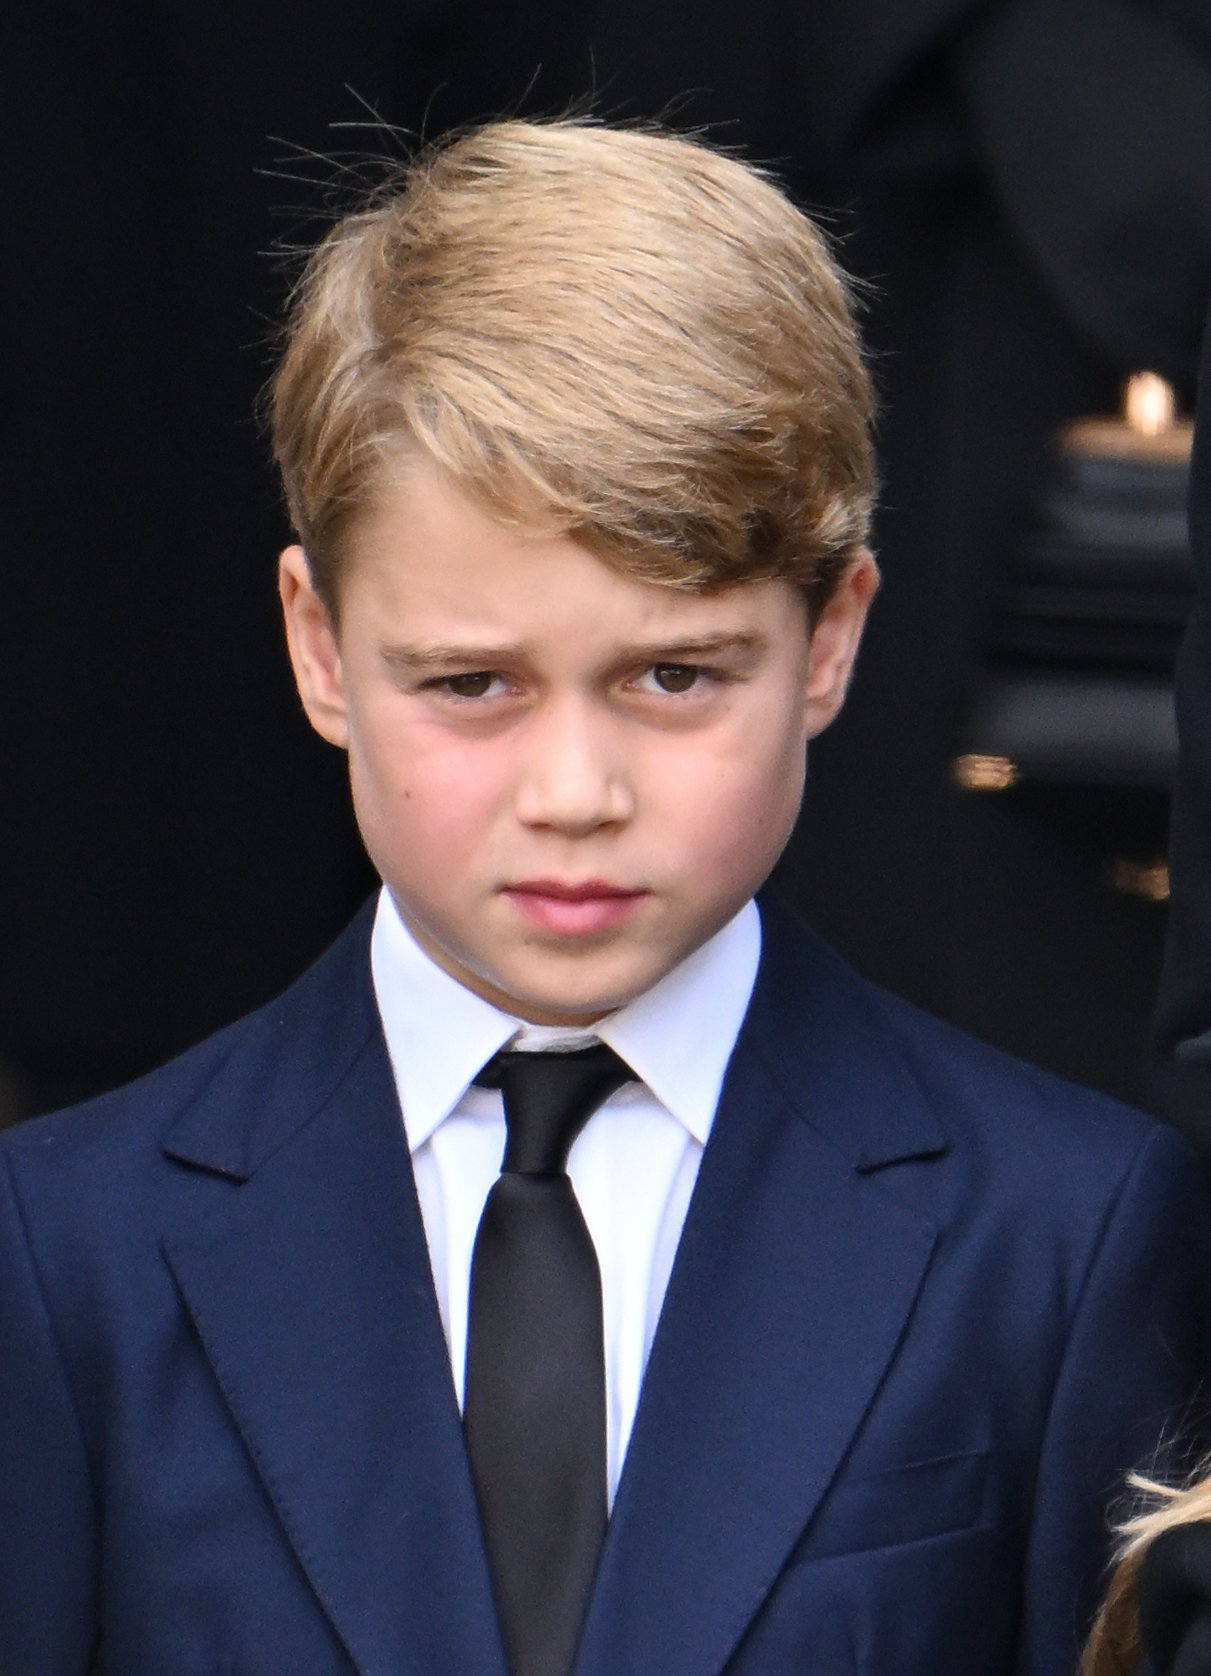 Prince George of Wales during the State Funeral of Queen Elizabeth II at Westminster Abbey on September 19, 2022 in London, England. | Source: Getty Images